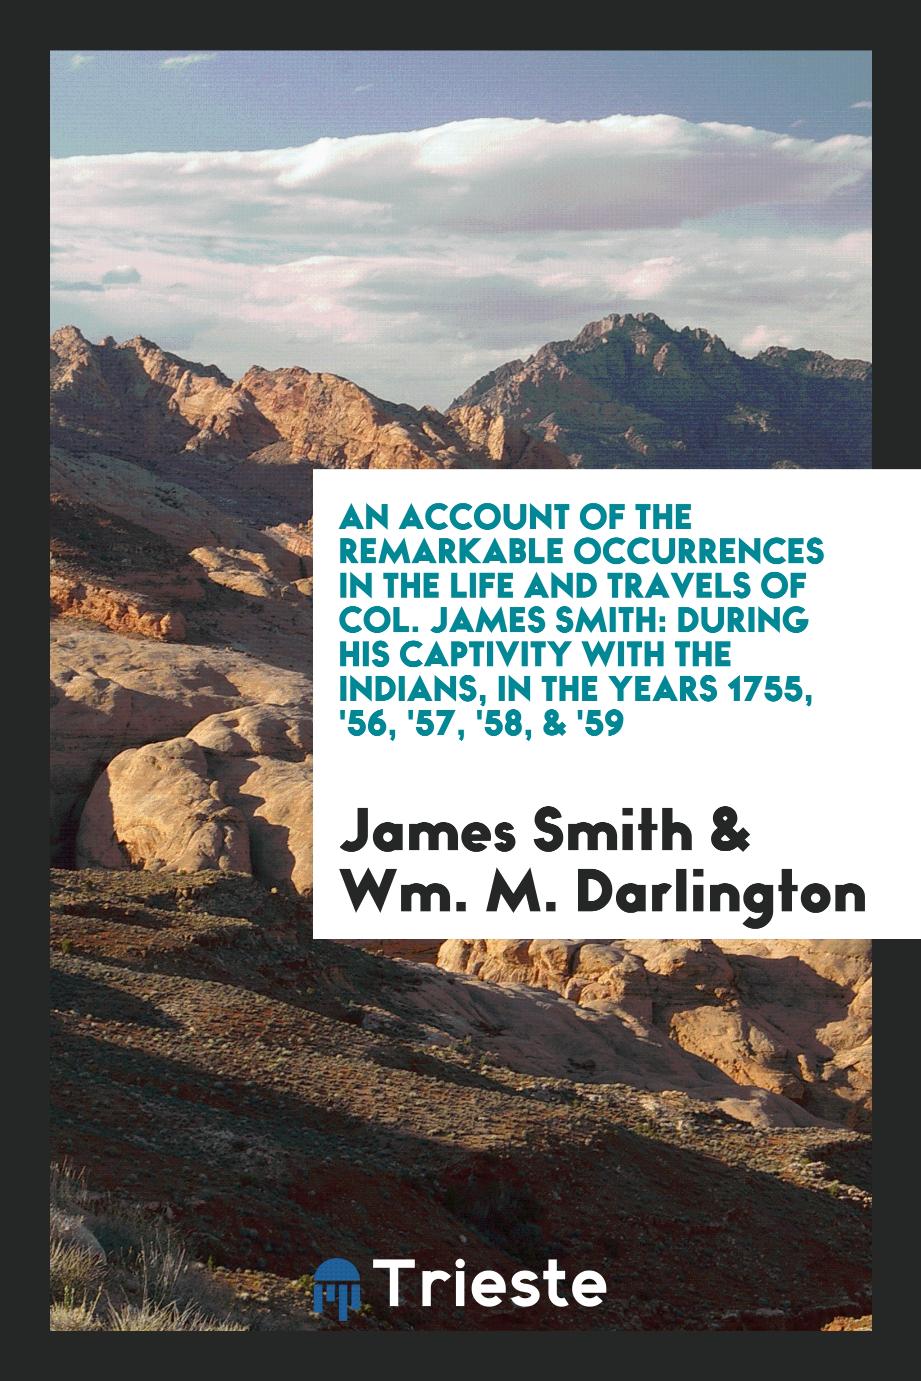 An account of the remarkable occurrences in the life and travels of Col. James Smith: during his captivity with the Indians, in the years 1755, '56, '57, '58, & '59